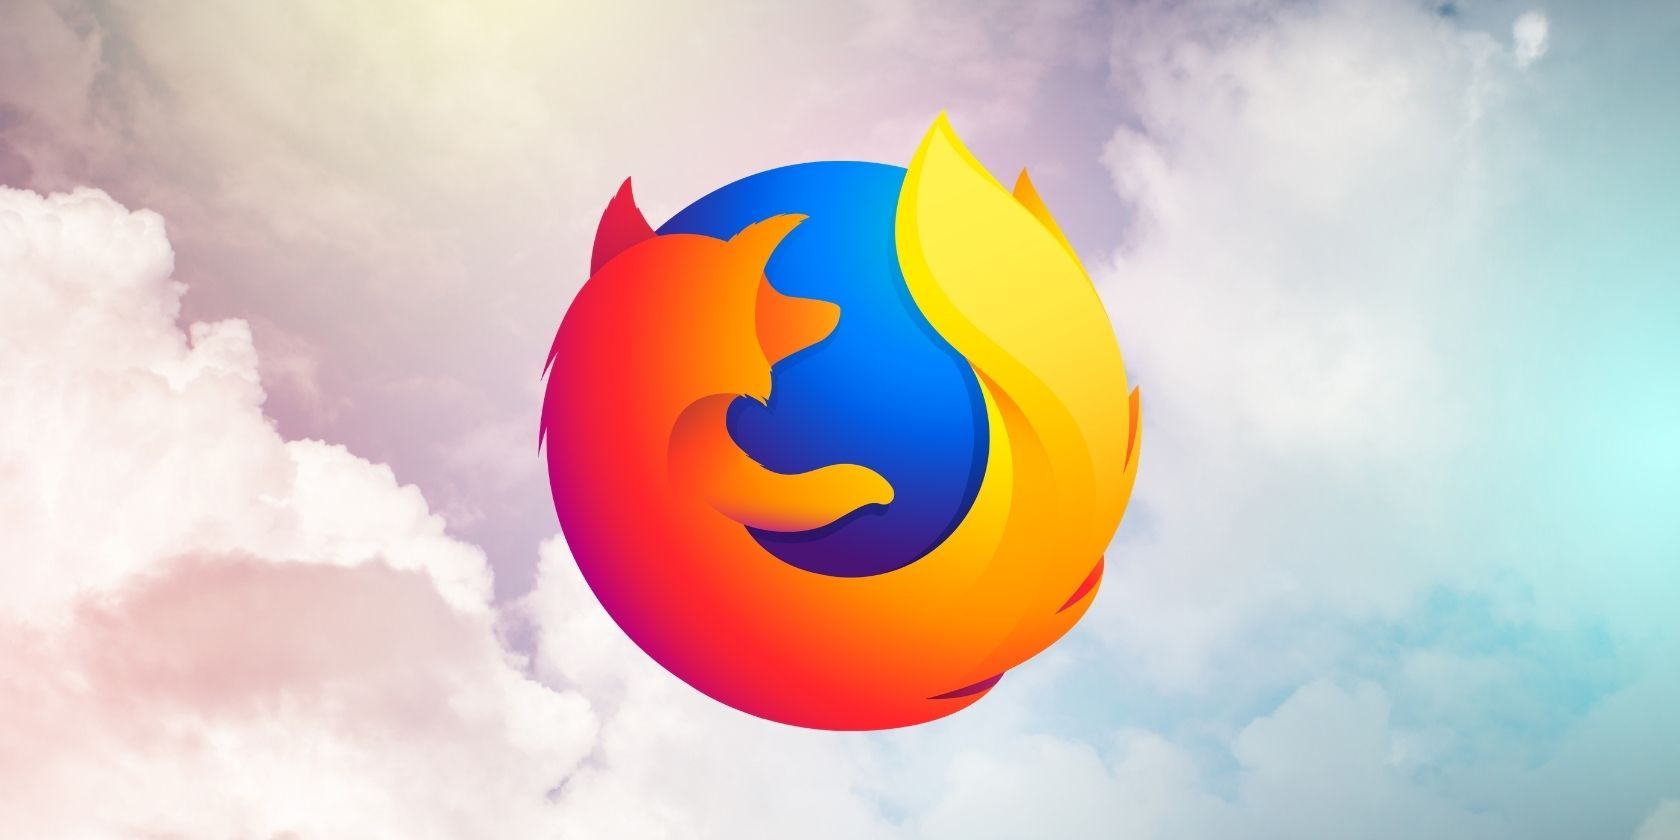 Firefox logo with cloud background